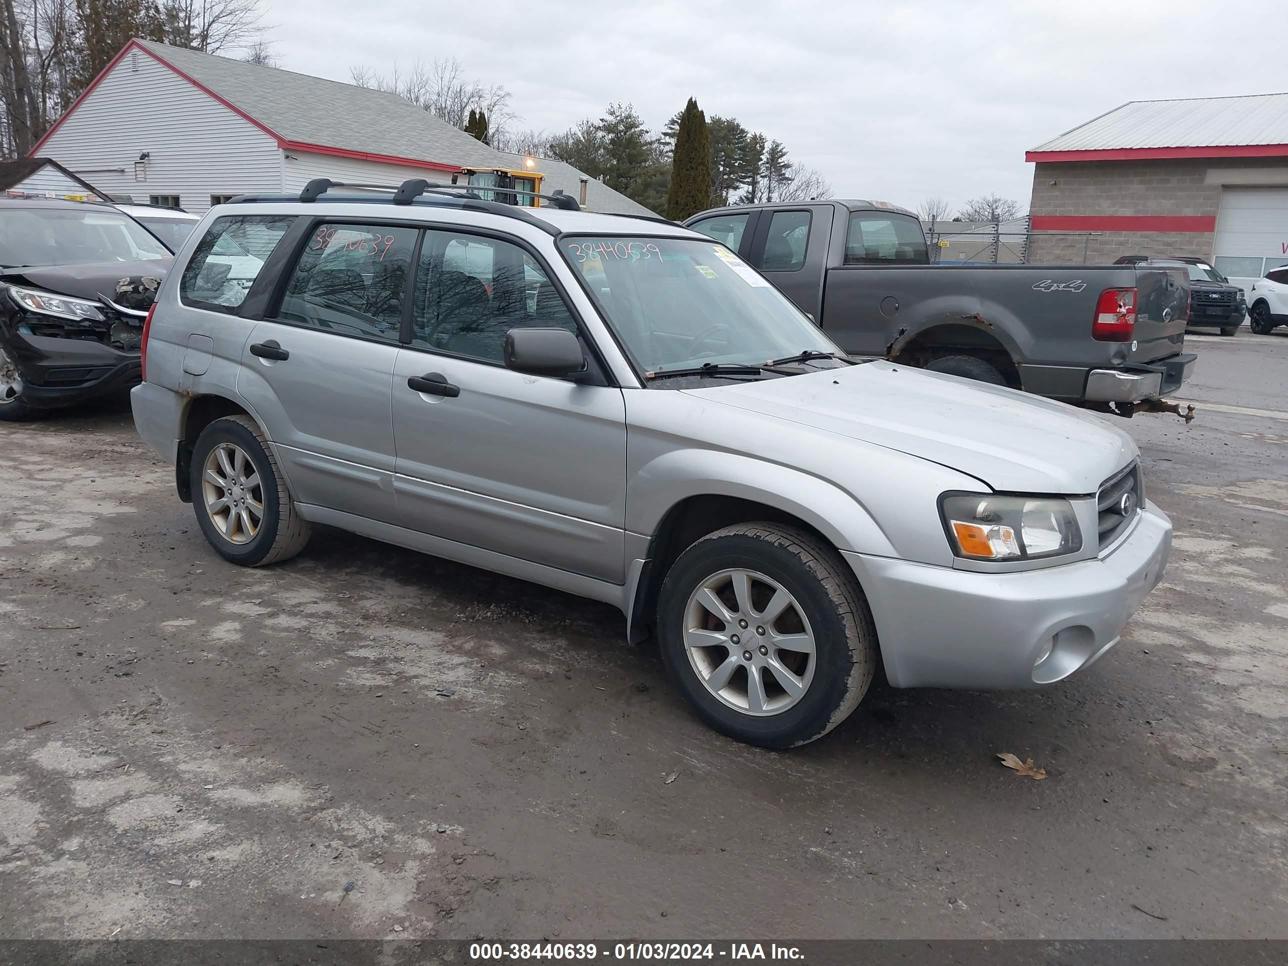 VIN: JF1SG65665H743488 - subaru forester